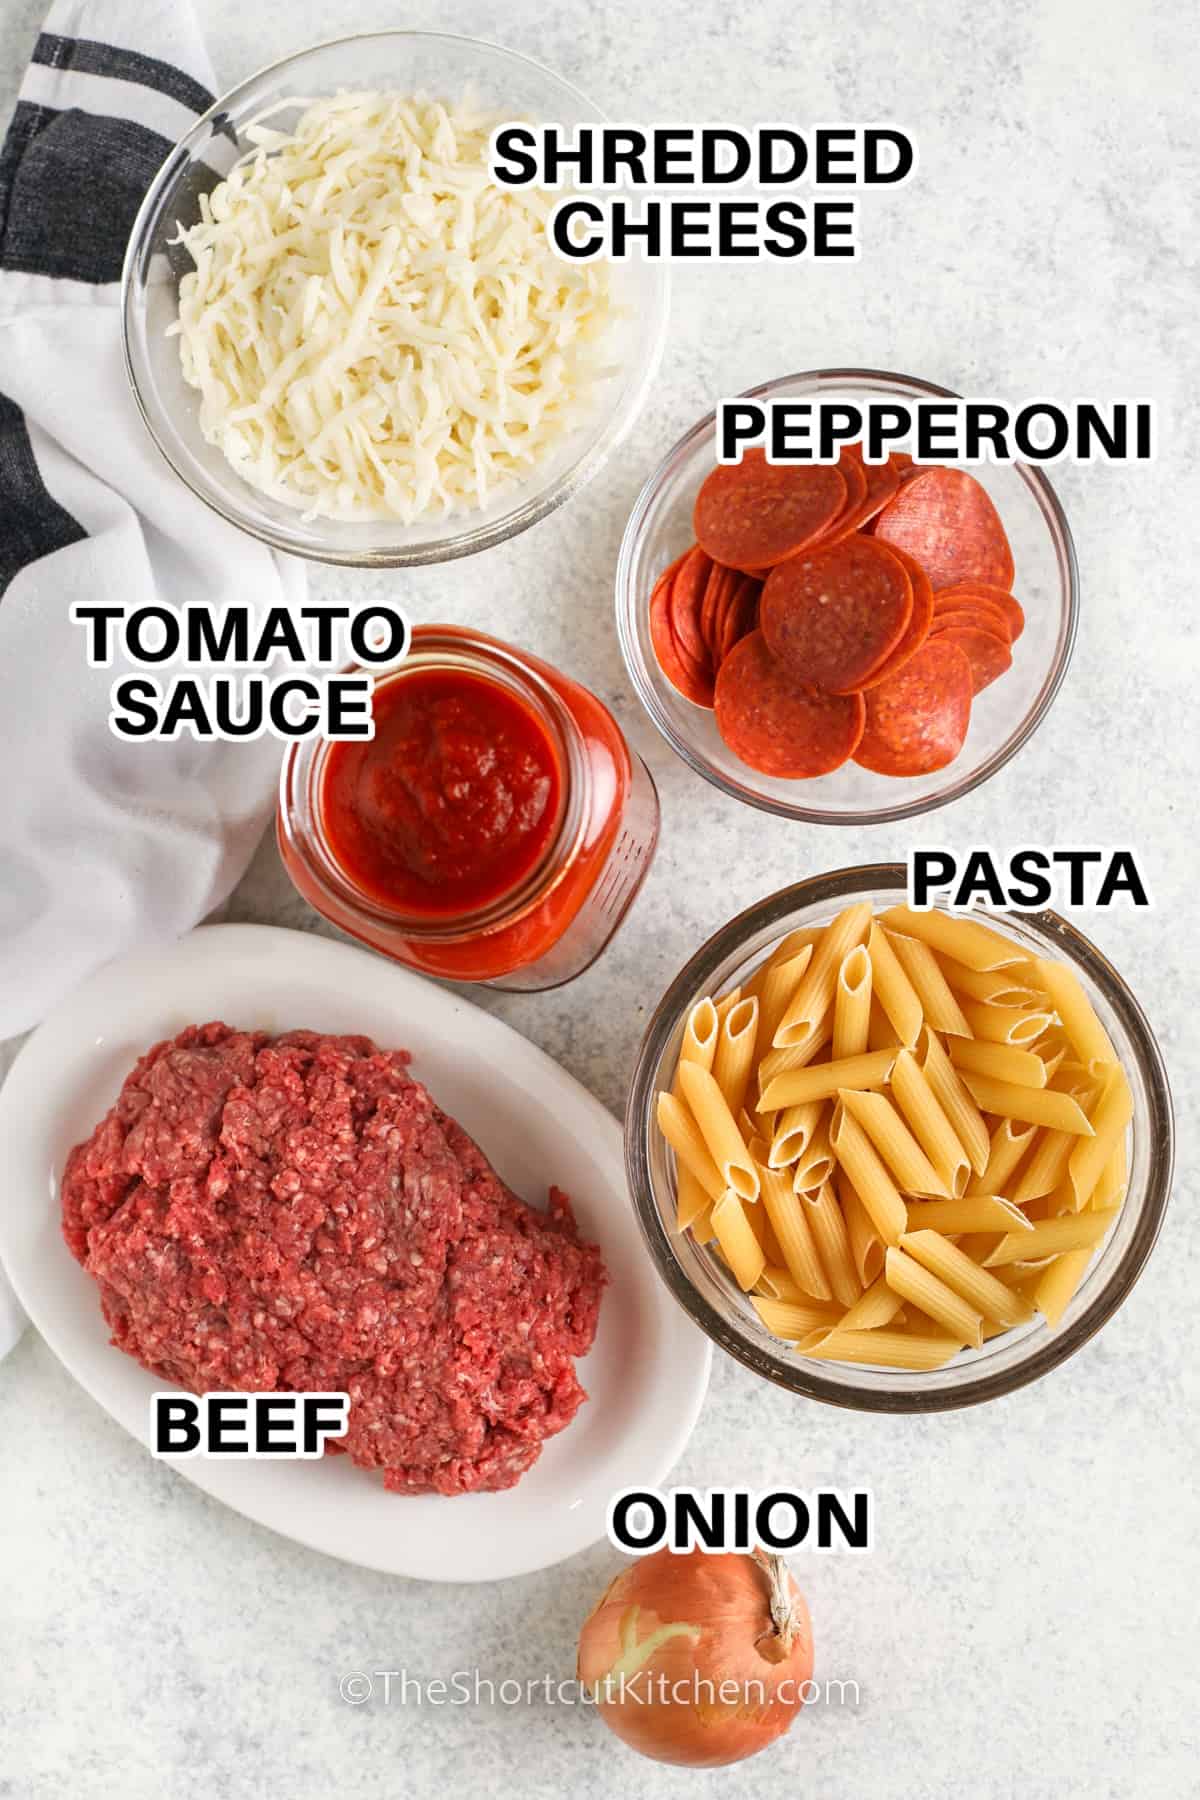 ingredients to make a pizza pasta bake: shredded cheese, pepperoni, tomato sauce, pasta, beef, and a onion